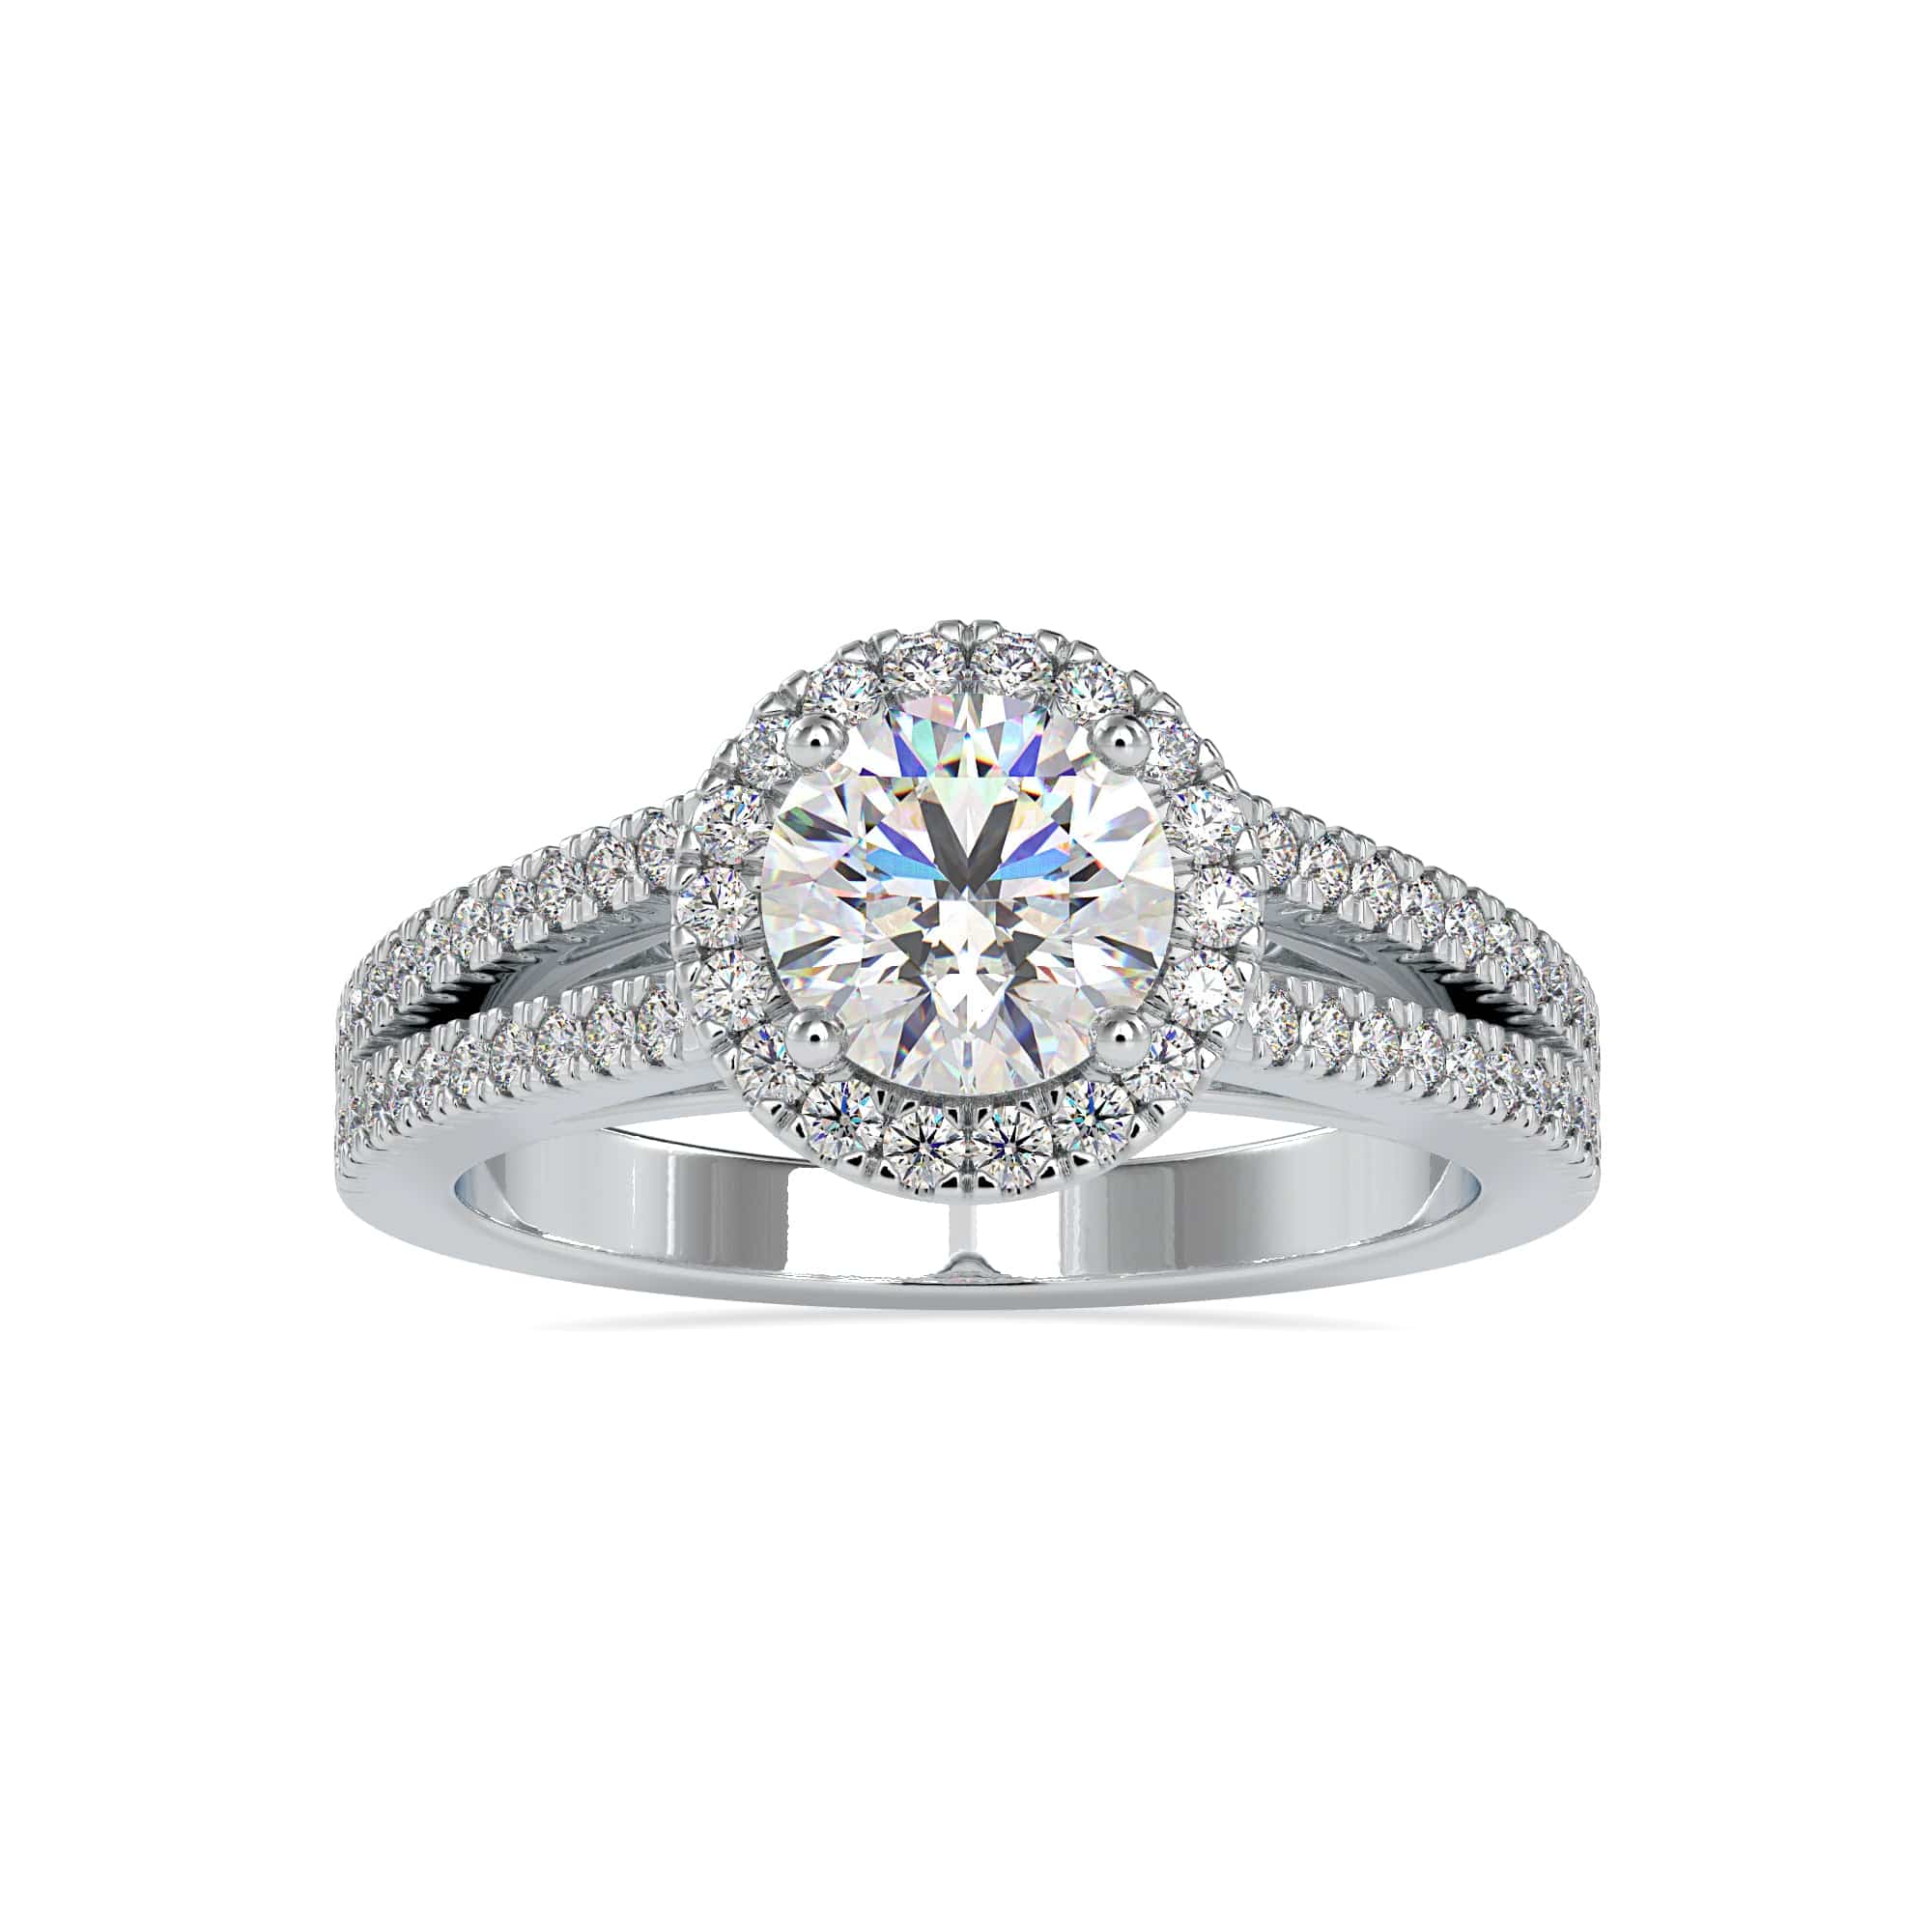 Why a Diamond Engagement Ring Is Not a Good Investment - SmartAsset |  SmartAsset